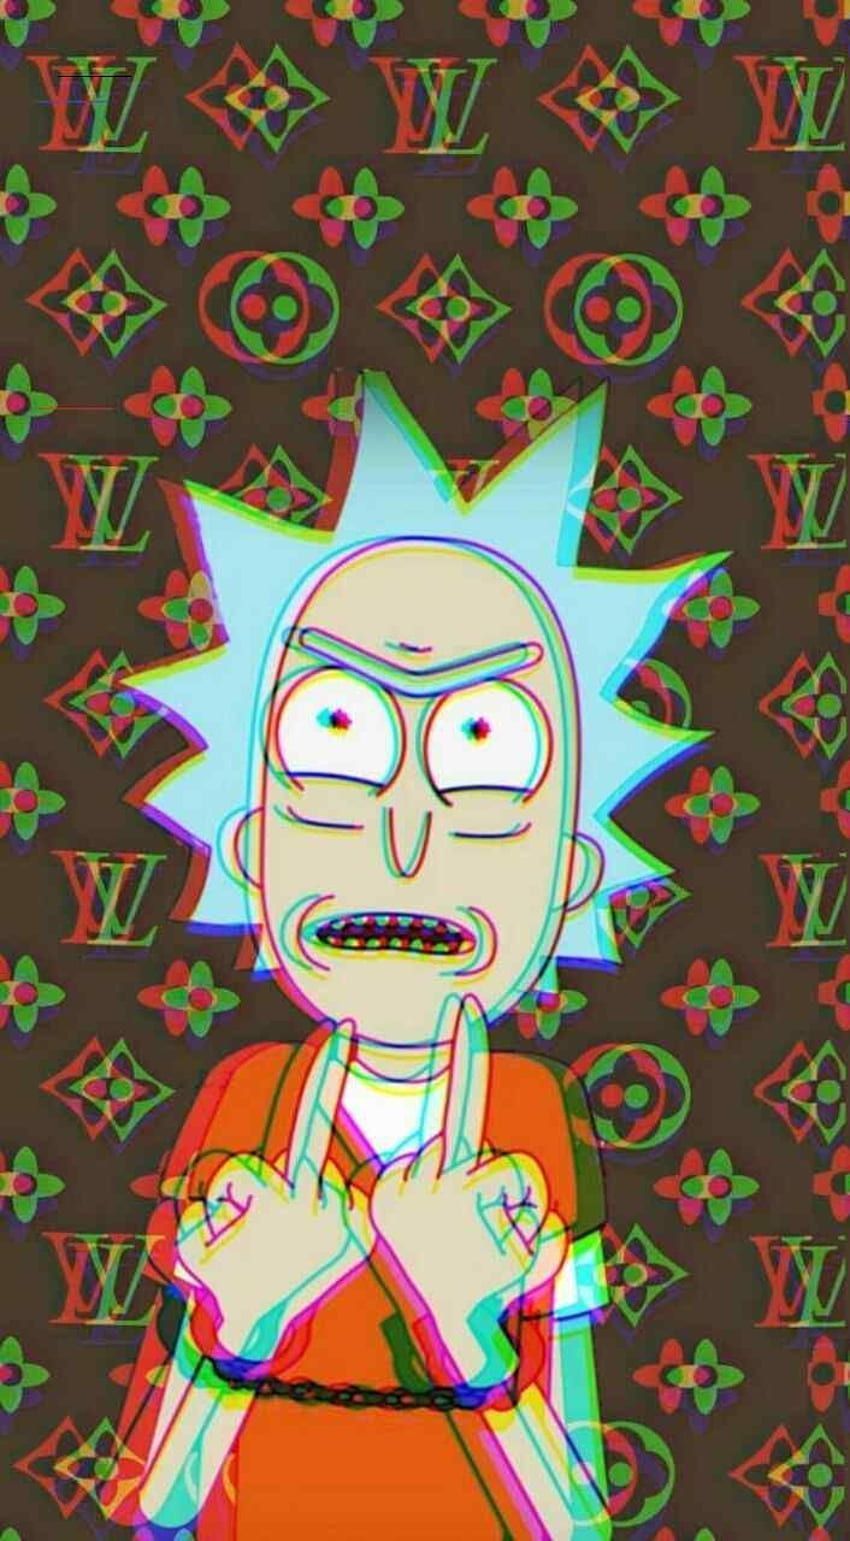 Rick and Morty wallpaper for phone - Rick and Morty, Louis Vuitton